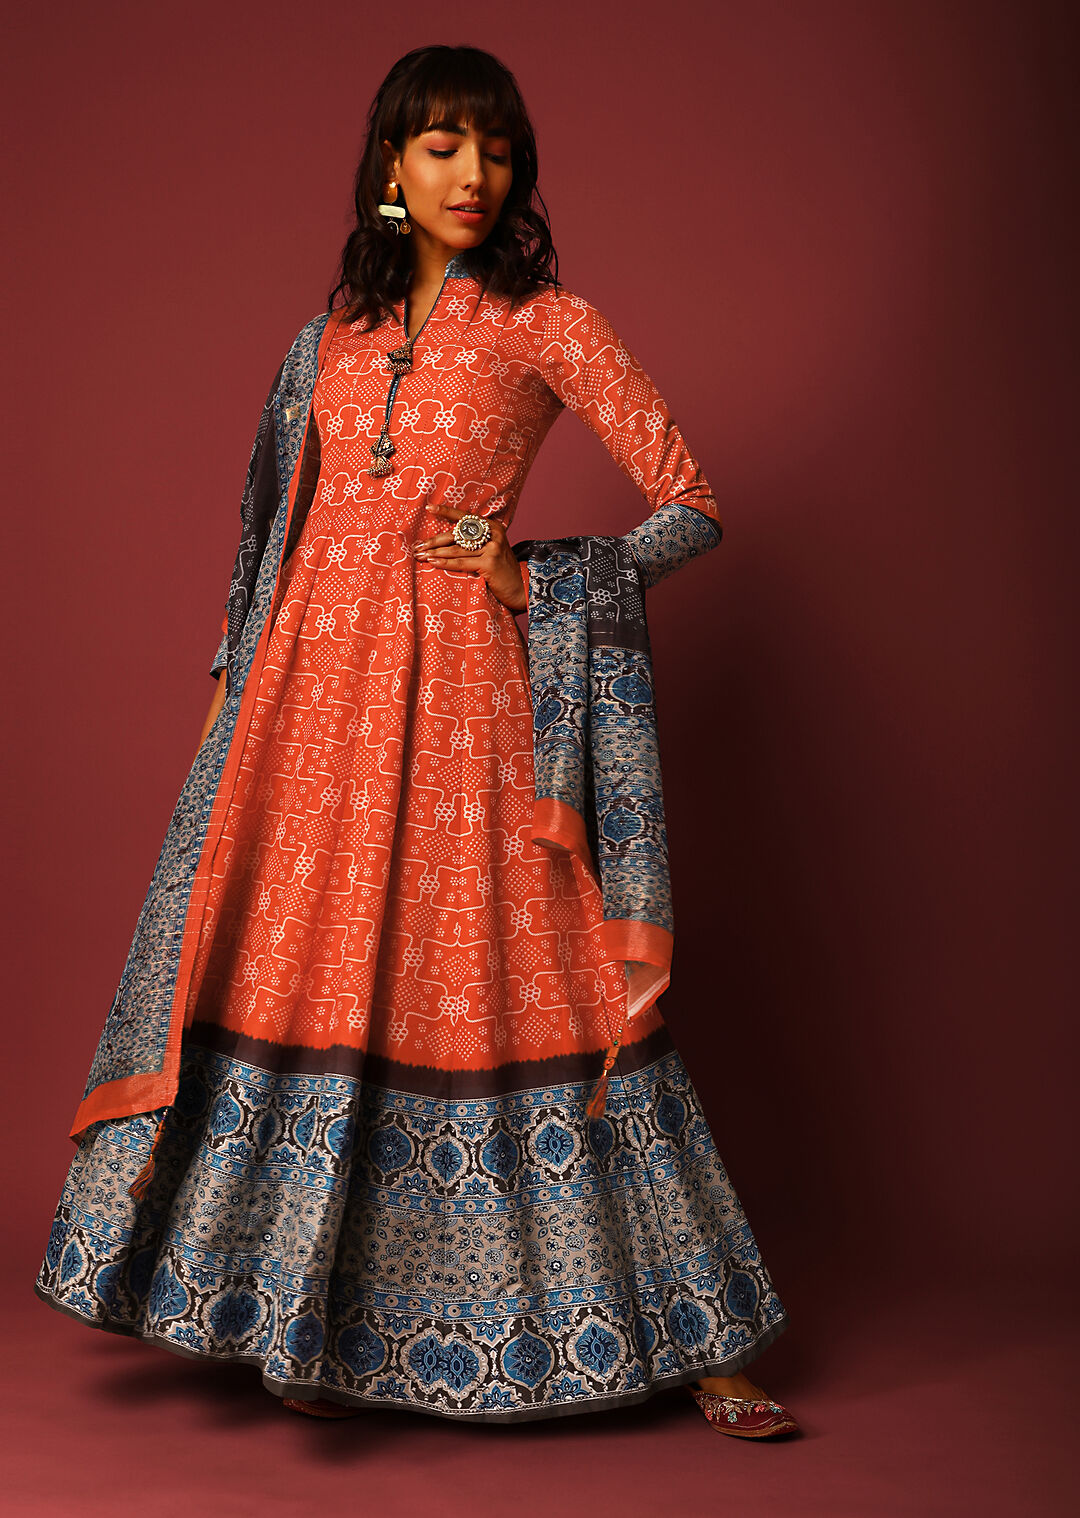 Orange Ethnic Motif Anarkali Indian Clothing in Denver, CO, Aurora, CO, Boulder, CO, Fort Collins, CO, Colorado Springs, CO, Parker, CO, Highlands Ranch, CO, Cherry Creek, CO, Centennial, CO, and Longmont, CO. NATIONWIDE SHIPPING USA- India Fashion X